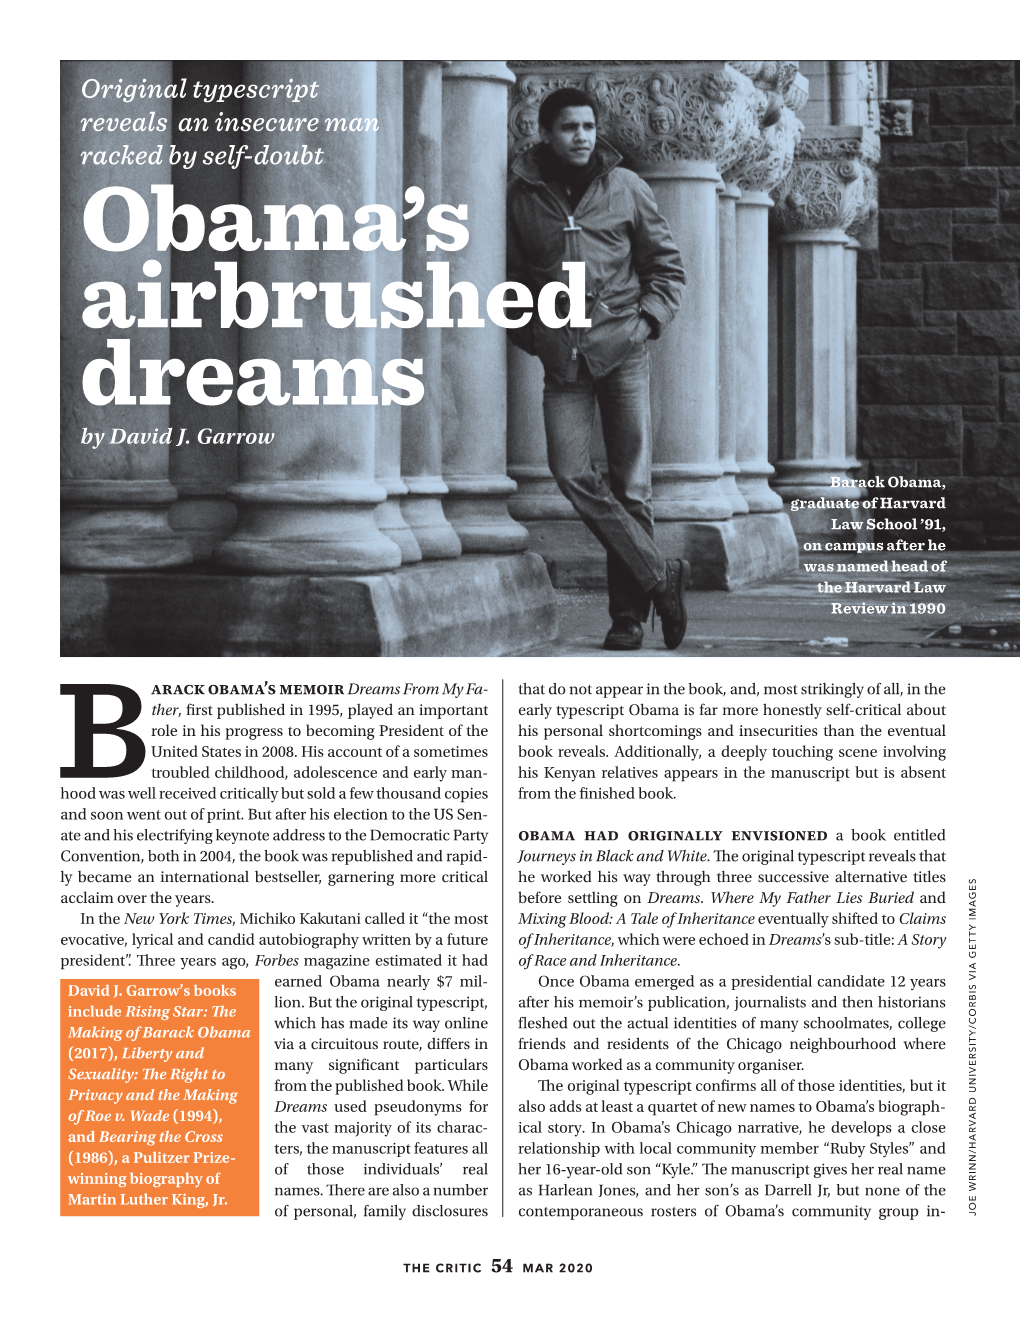 Obama's Airbrushed Dreams